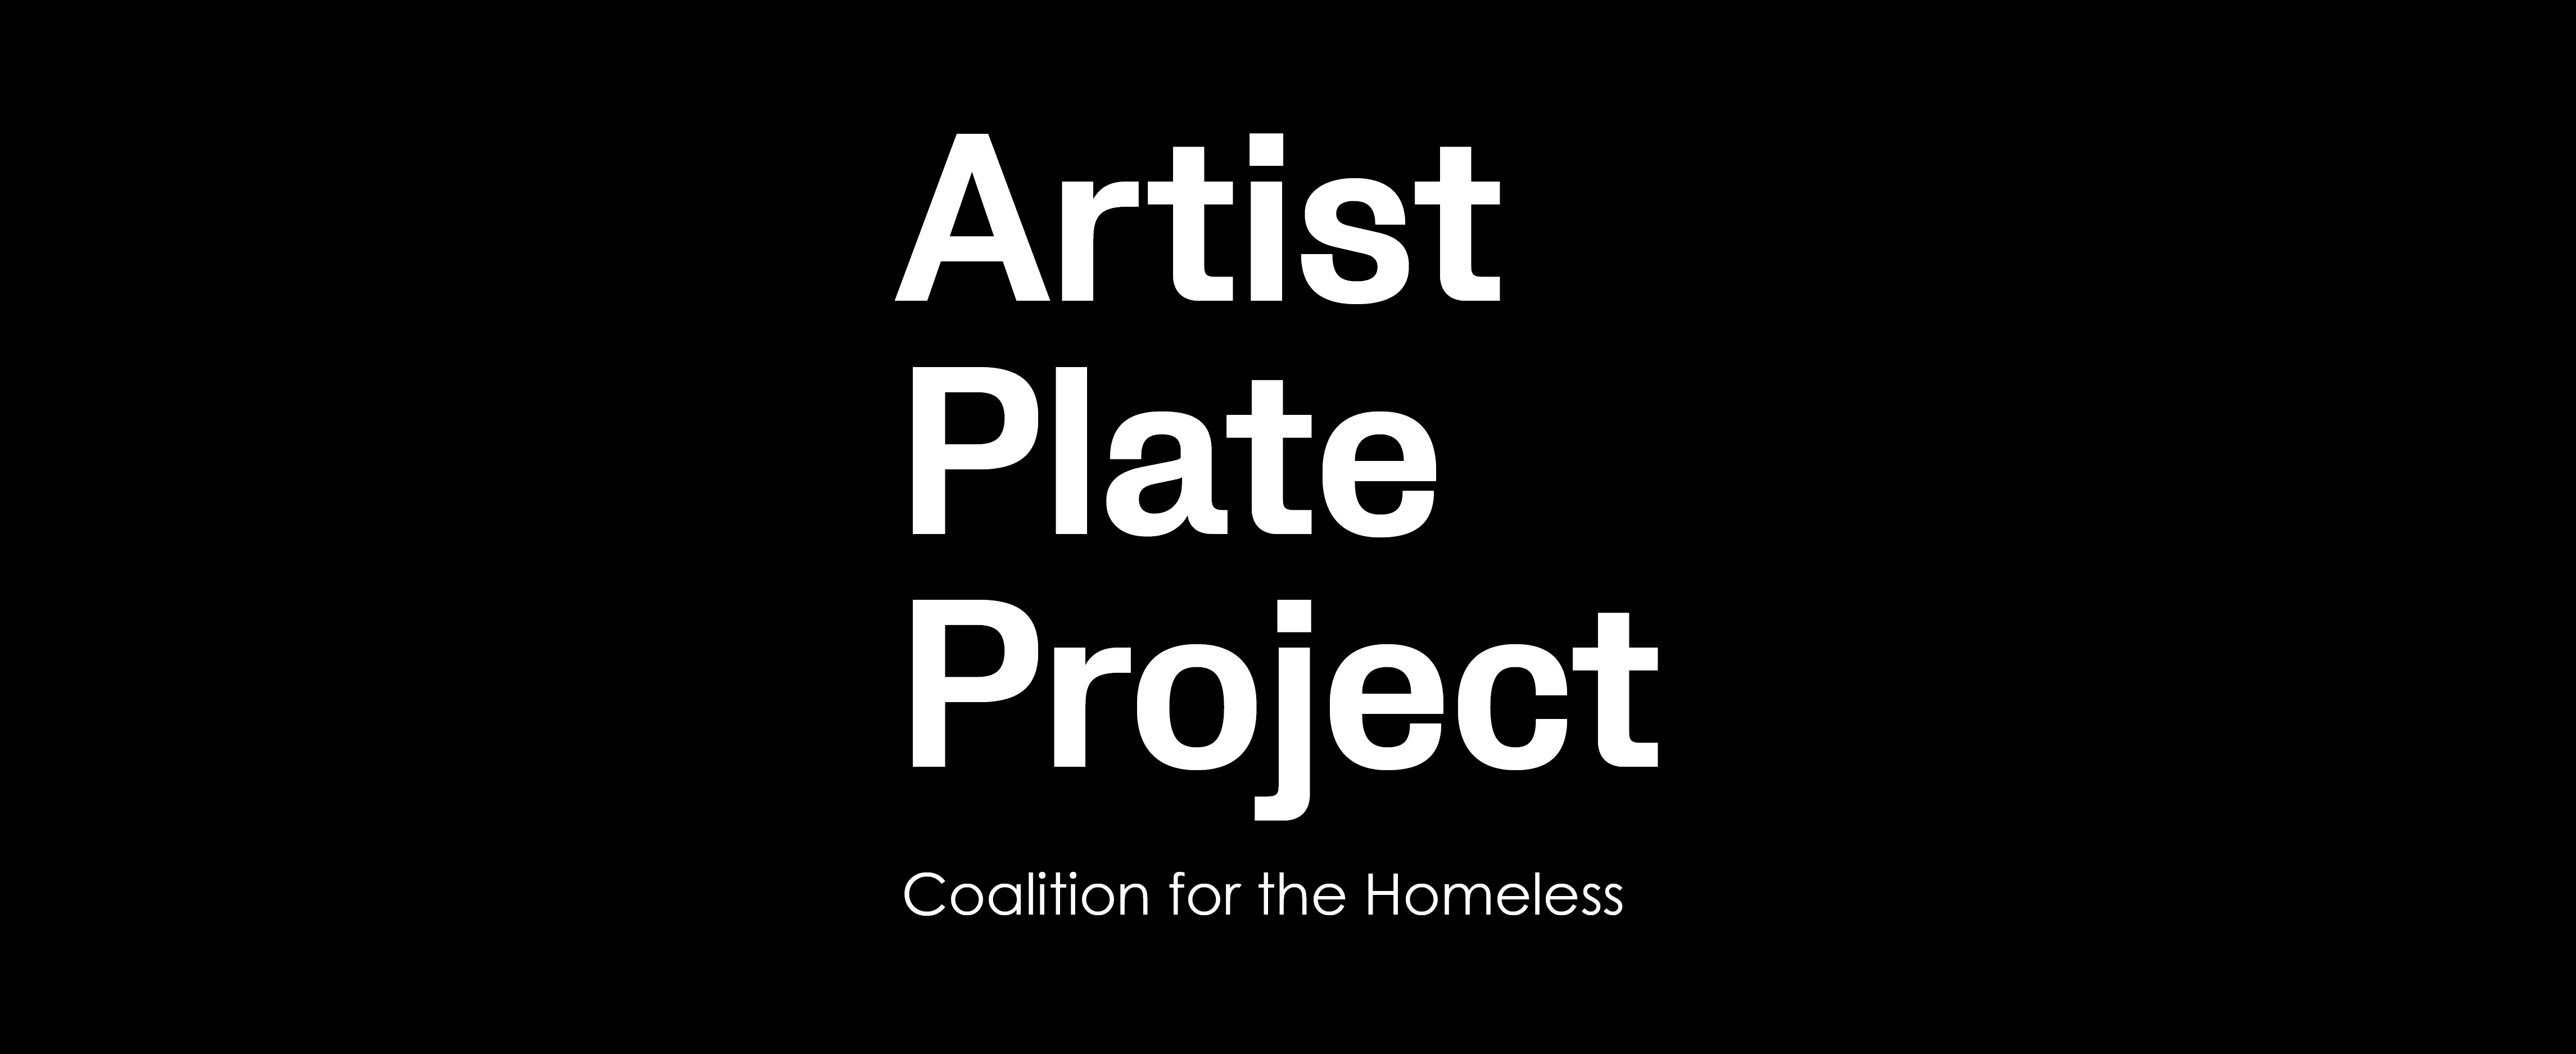 Artist Plate Project